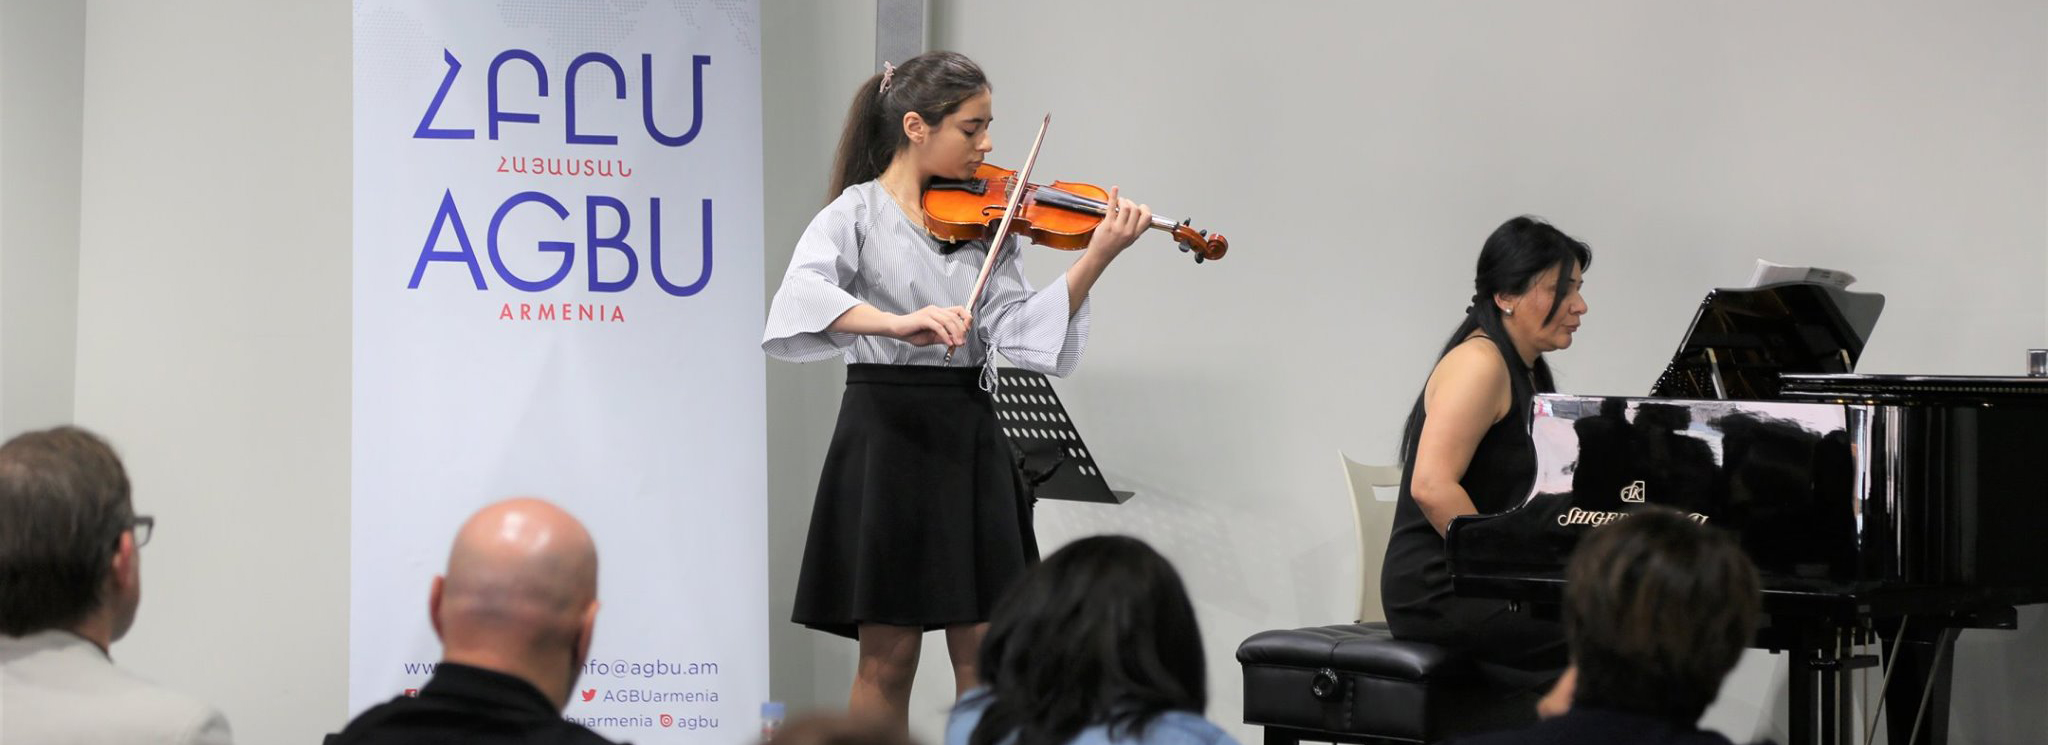 AGBU France supports AGBU Discovers Talents Programme in Armenia and lends Instruments to Promising Young Musicians